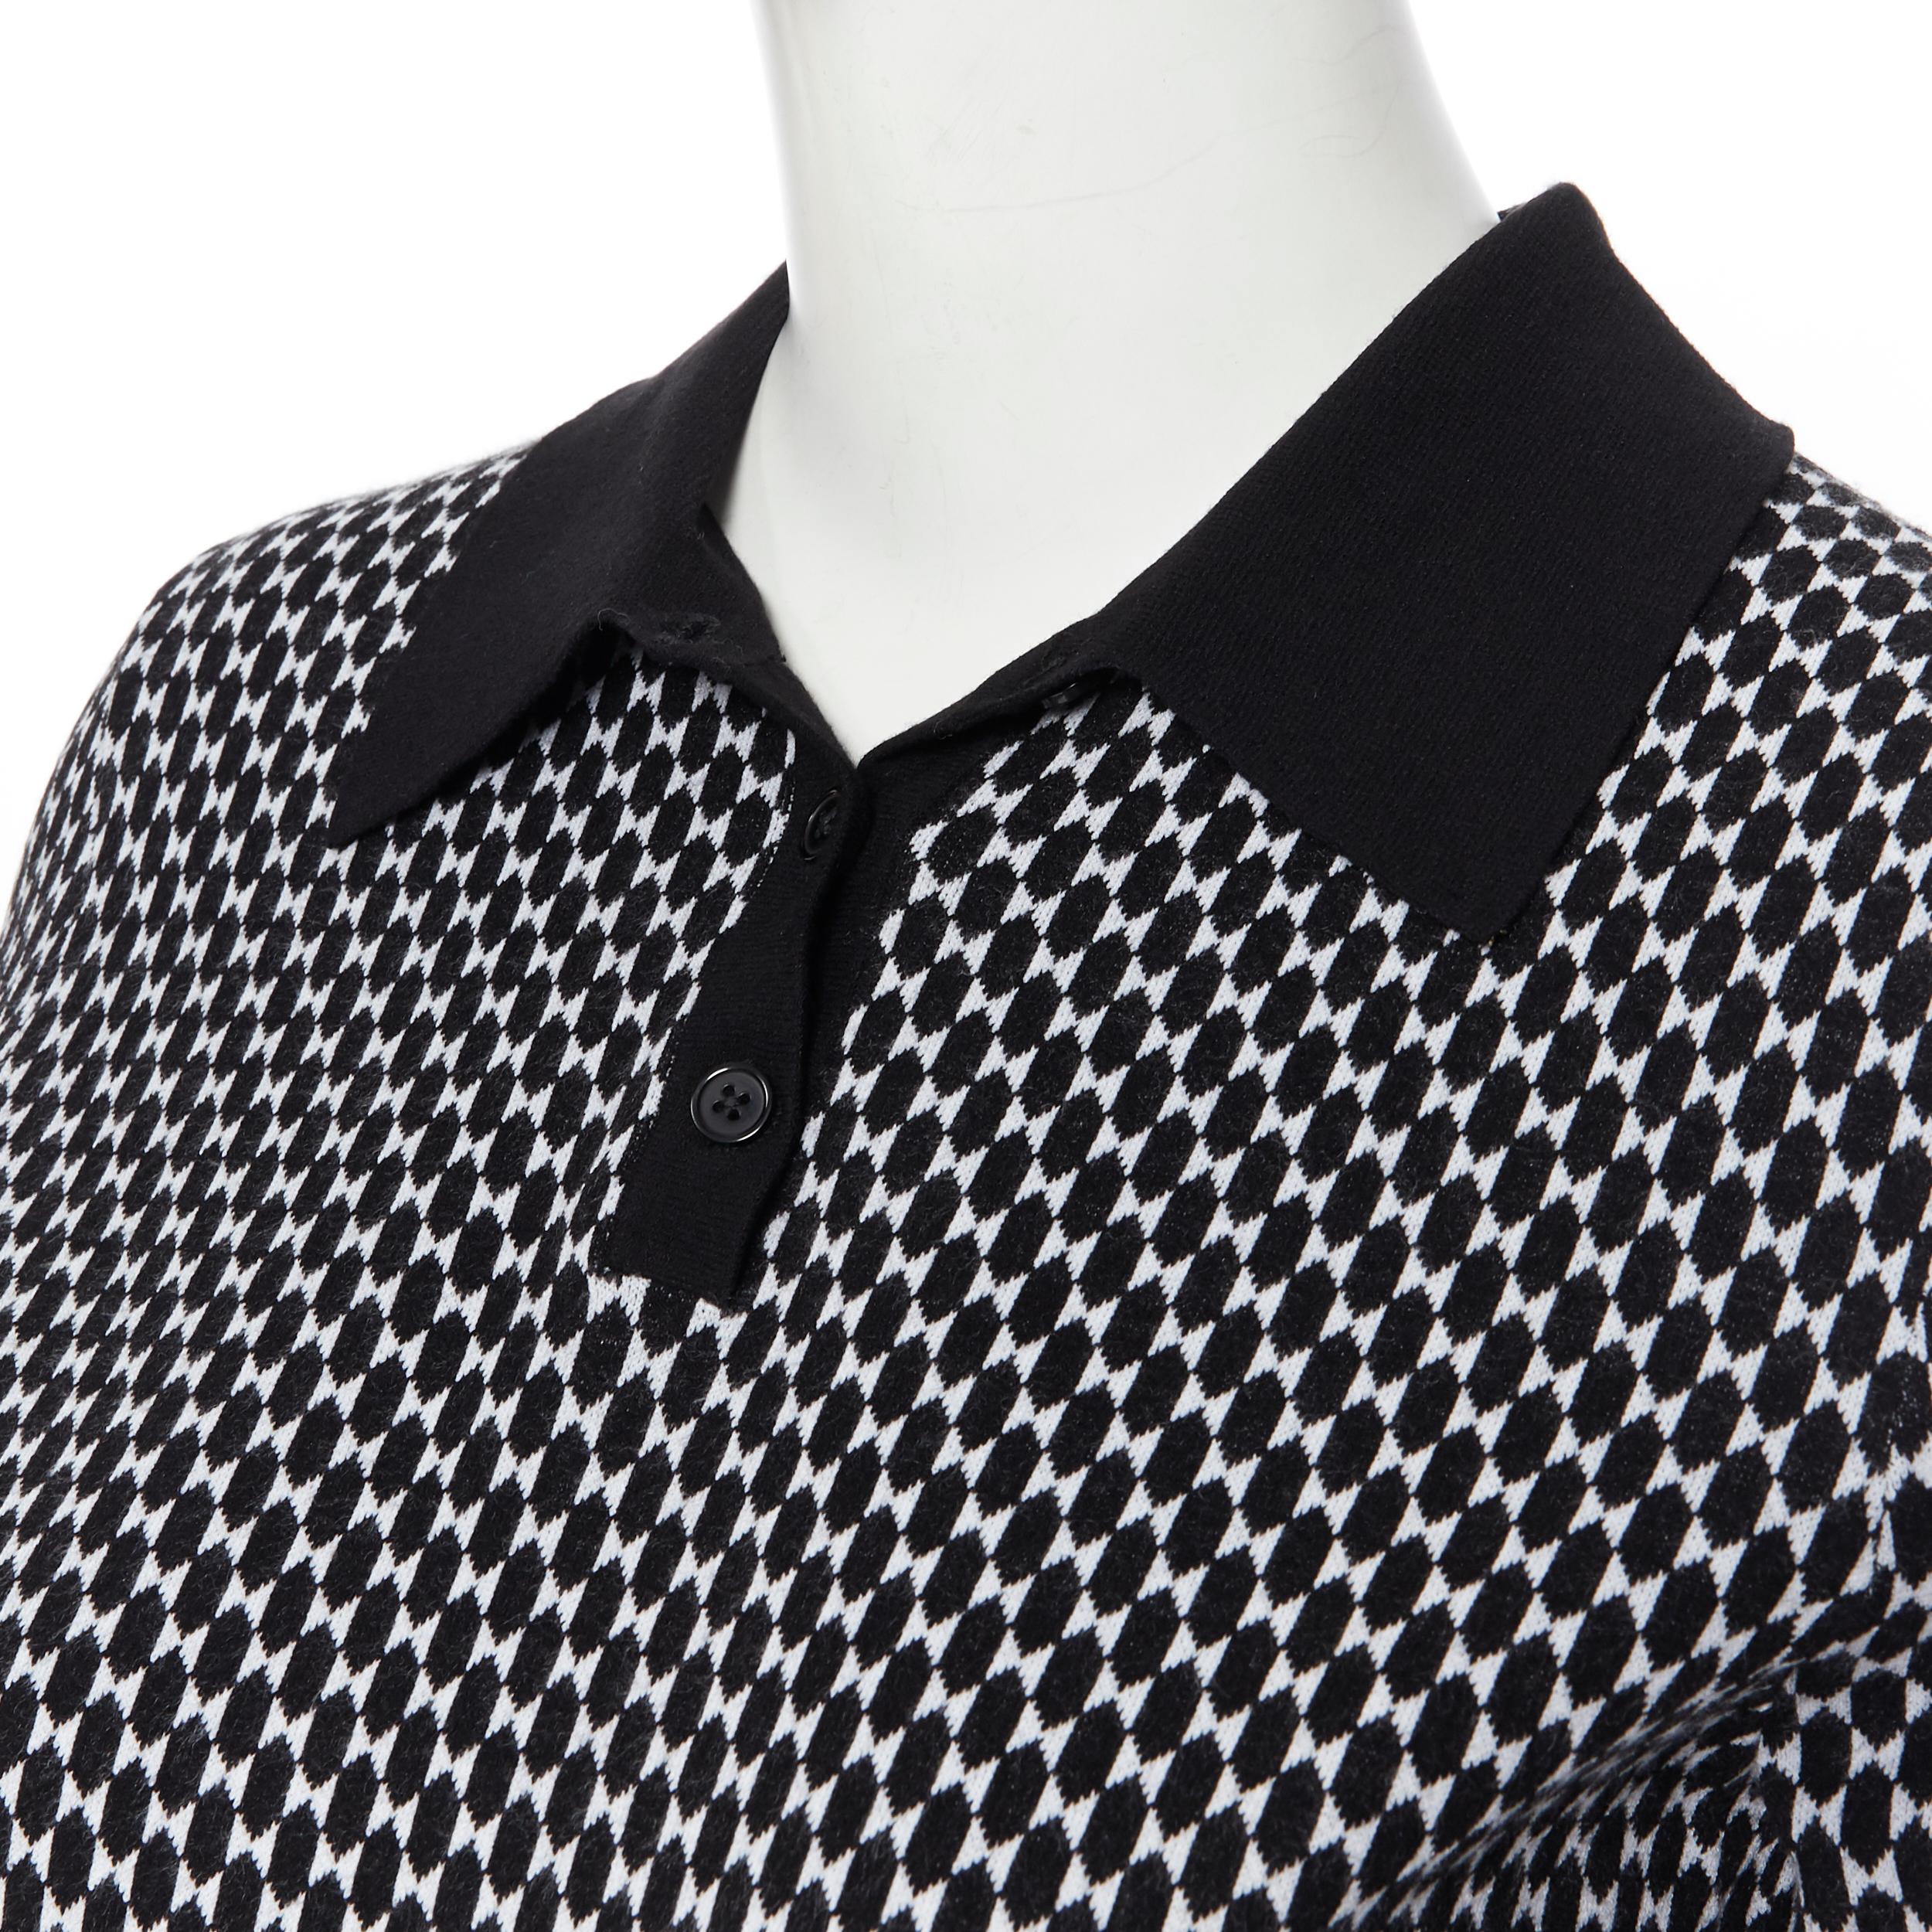 MICHAEL KORS COLLECTION black white geometric stretch knit polo shirt top XS
Brand: Michael Kors
Designer: Michael Kors
Model Name / Style: Polo top
Material: Viscose, polyester
Color: Black
Pattern: Geometric
Extra Detail: Button spread polo